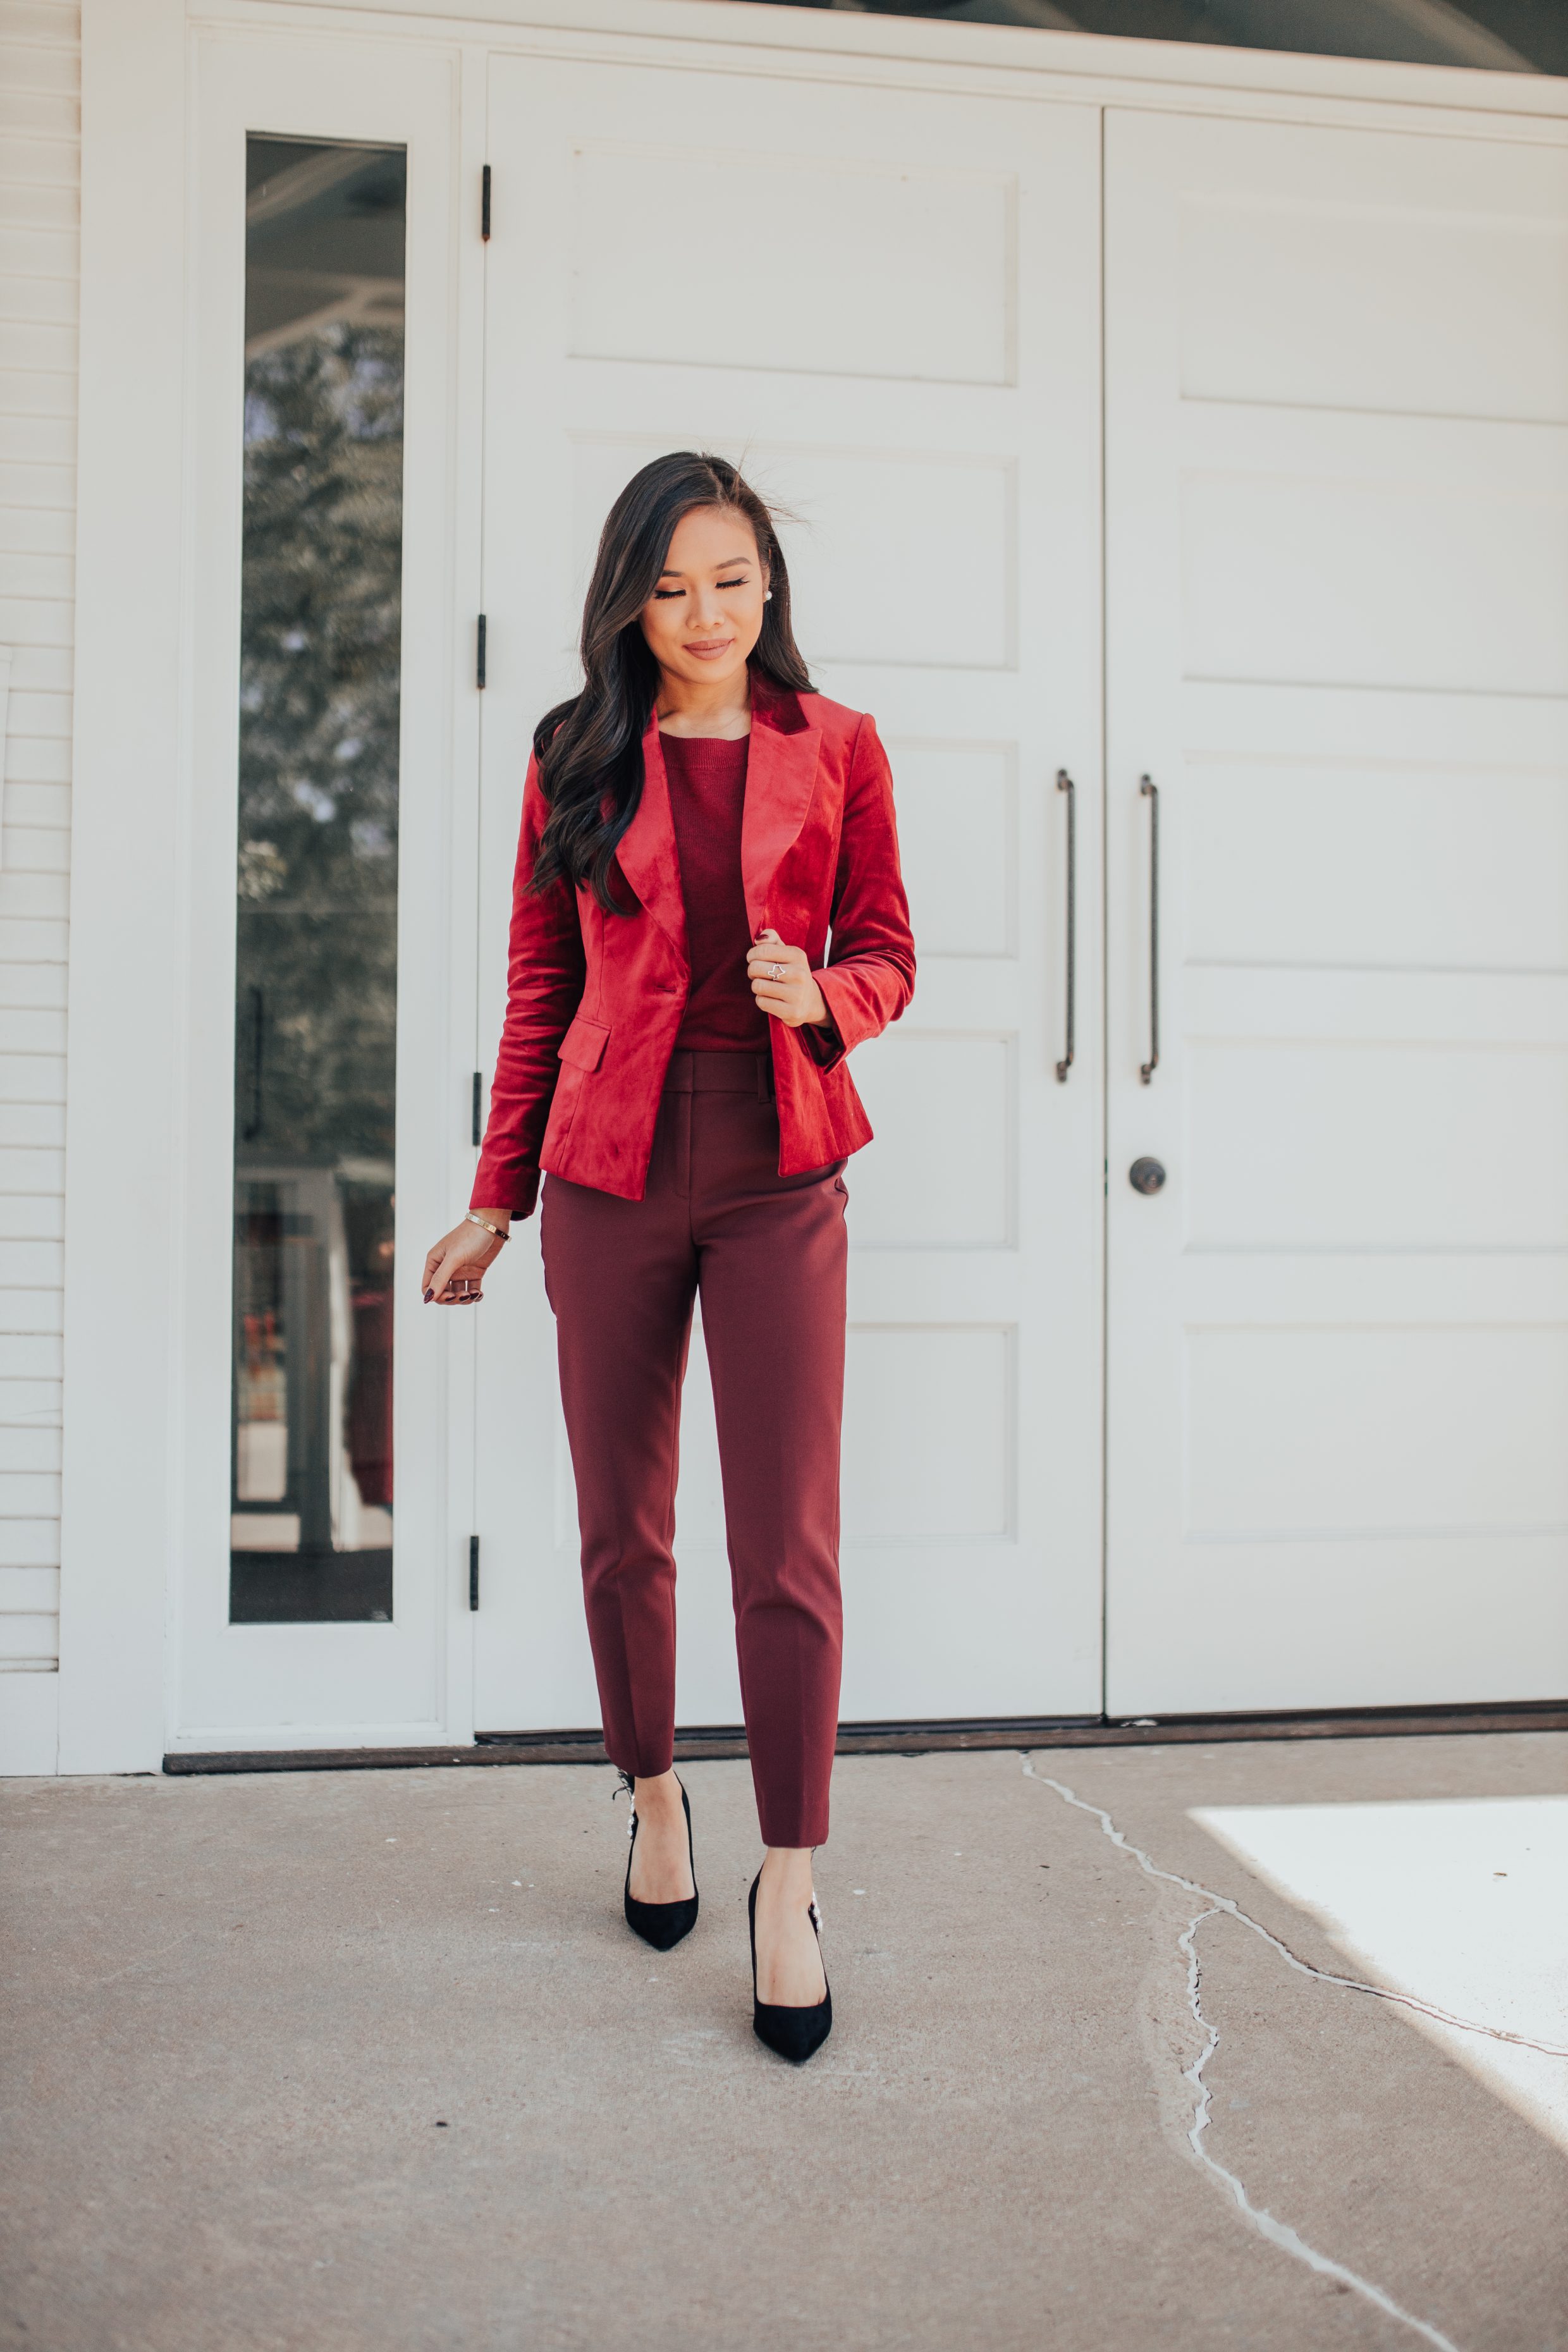 Holiday workwear style with a velvet blazer, cashmere sweater and dark red pants